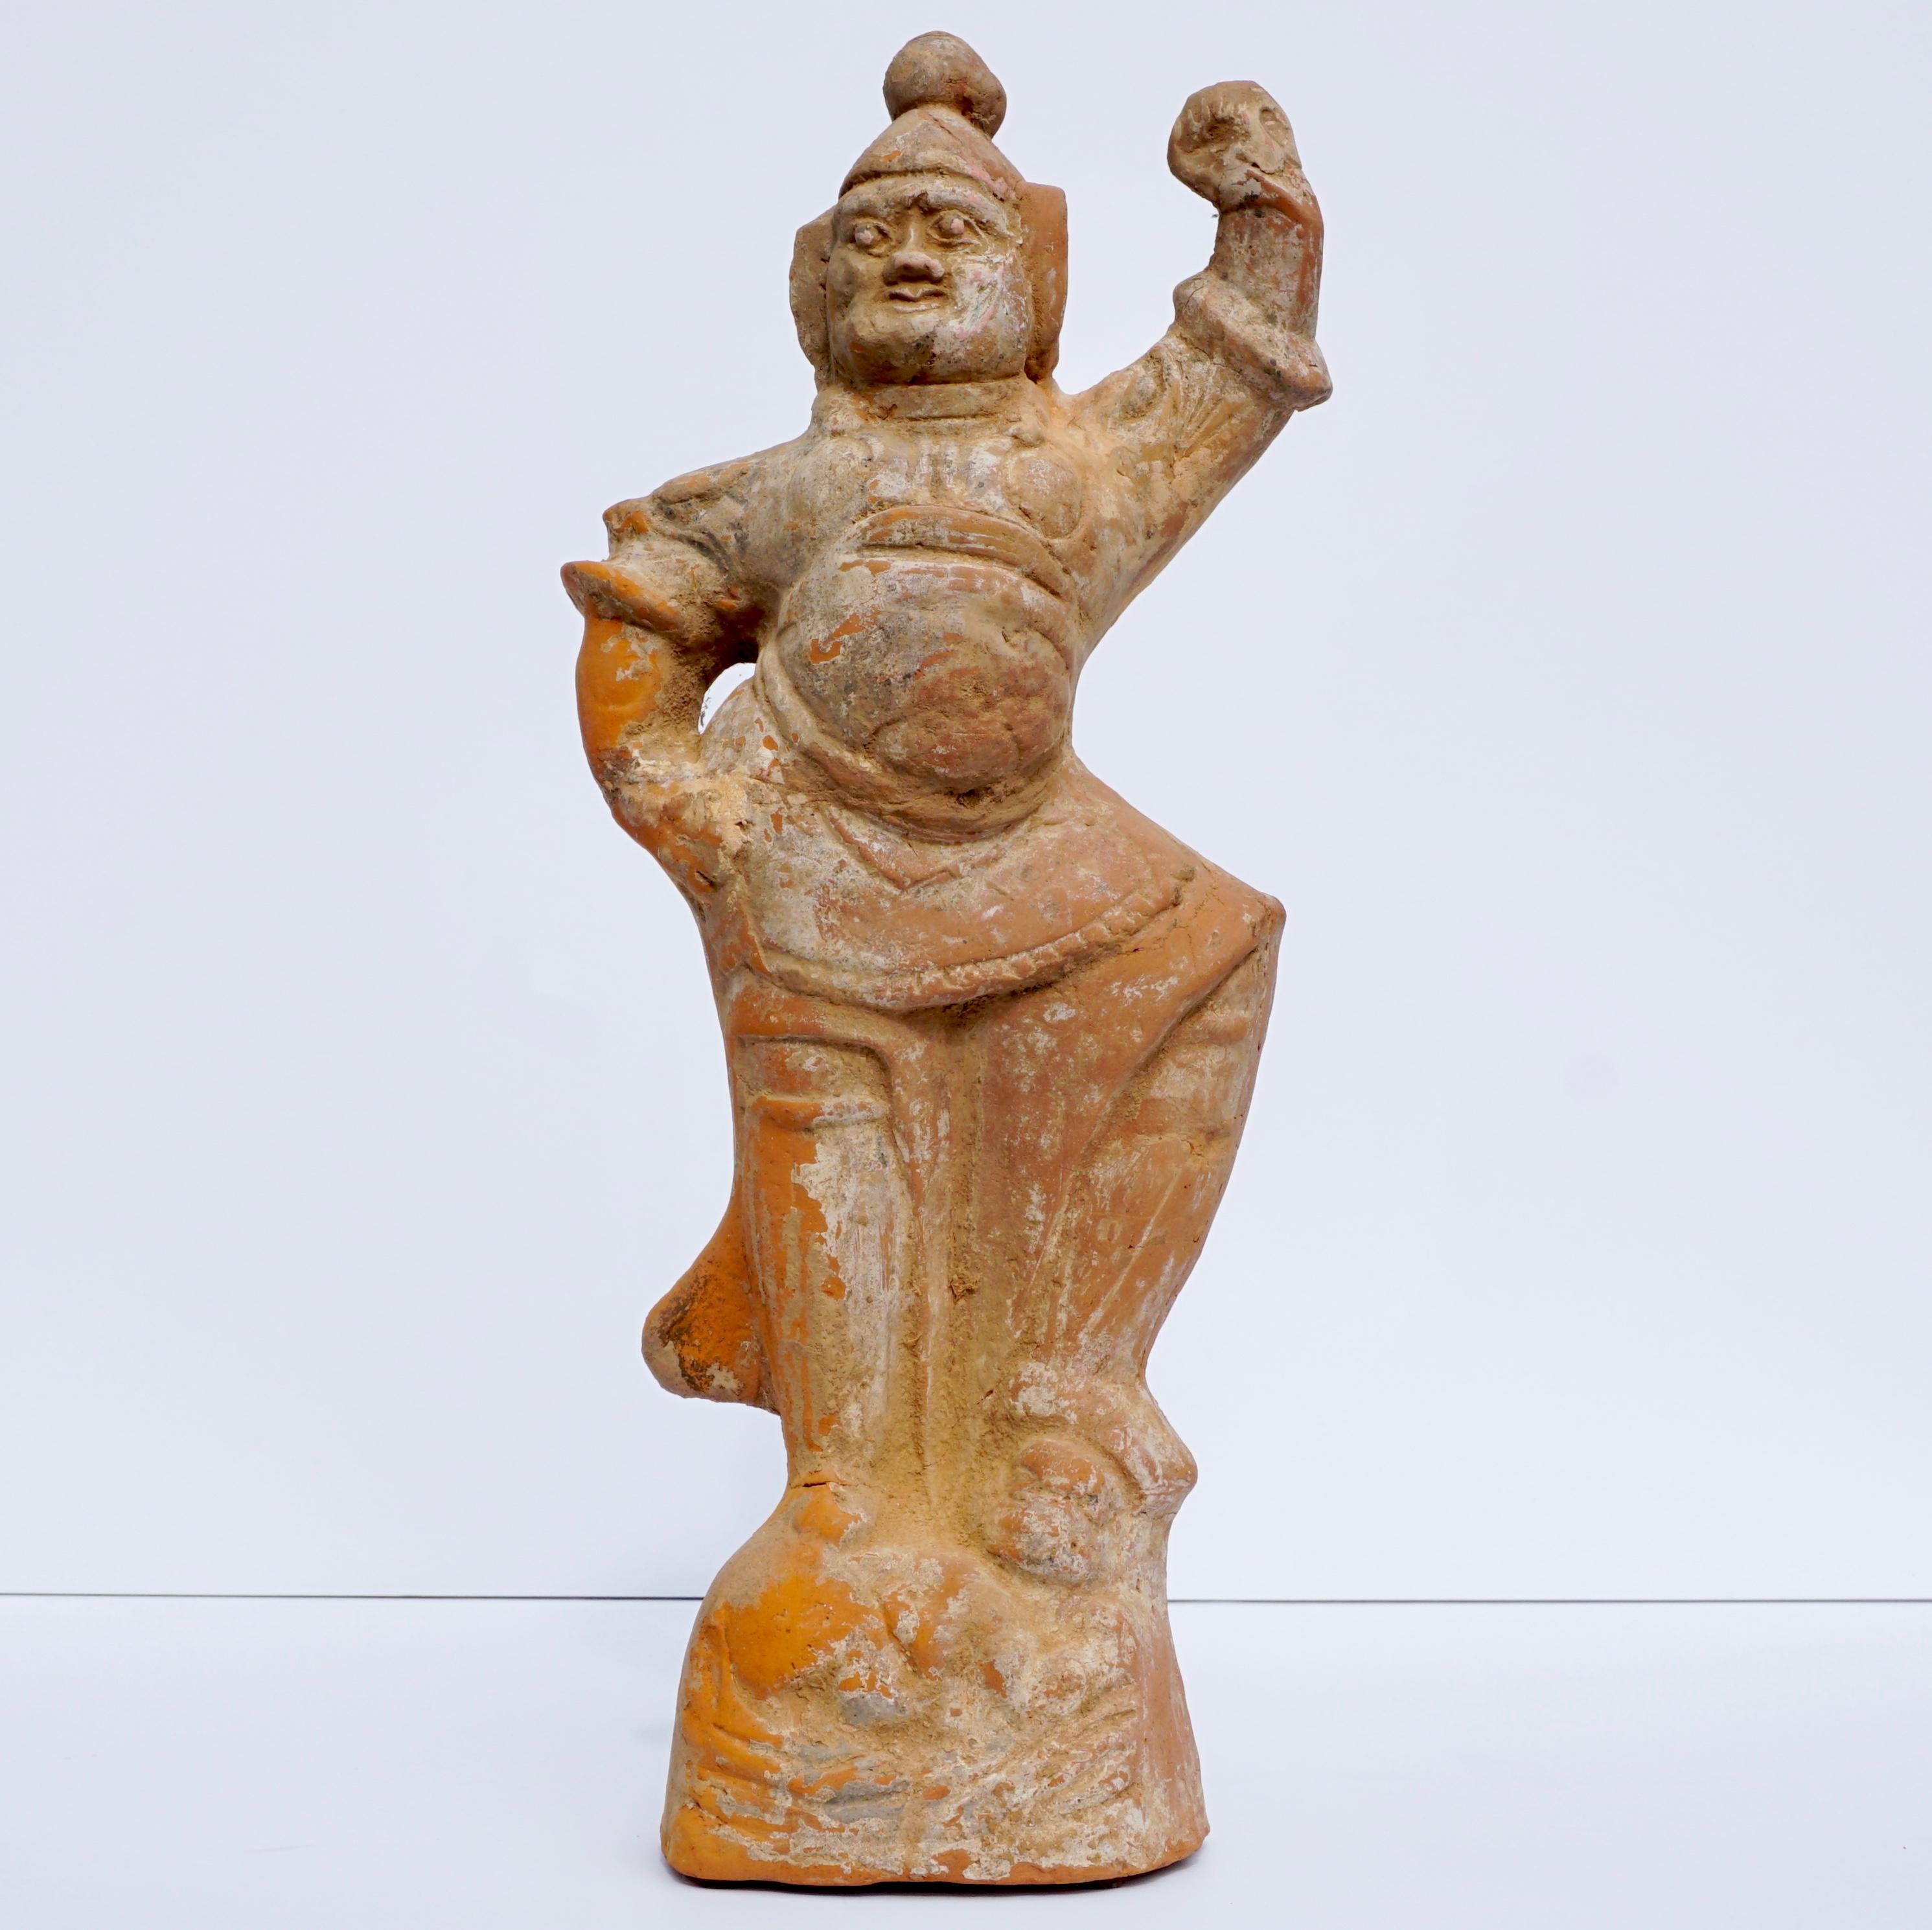 Tang Dynasty terracotta Pottery Tomb figure of the Lokapala Warrier Deity. Figure molded wearing heavy armor, standing in a dynamic pose with left arm raised in a threatening gesture, standing atop a bull,
circa 618 AD to 906 AD From a NYC